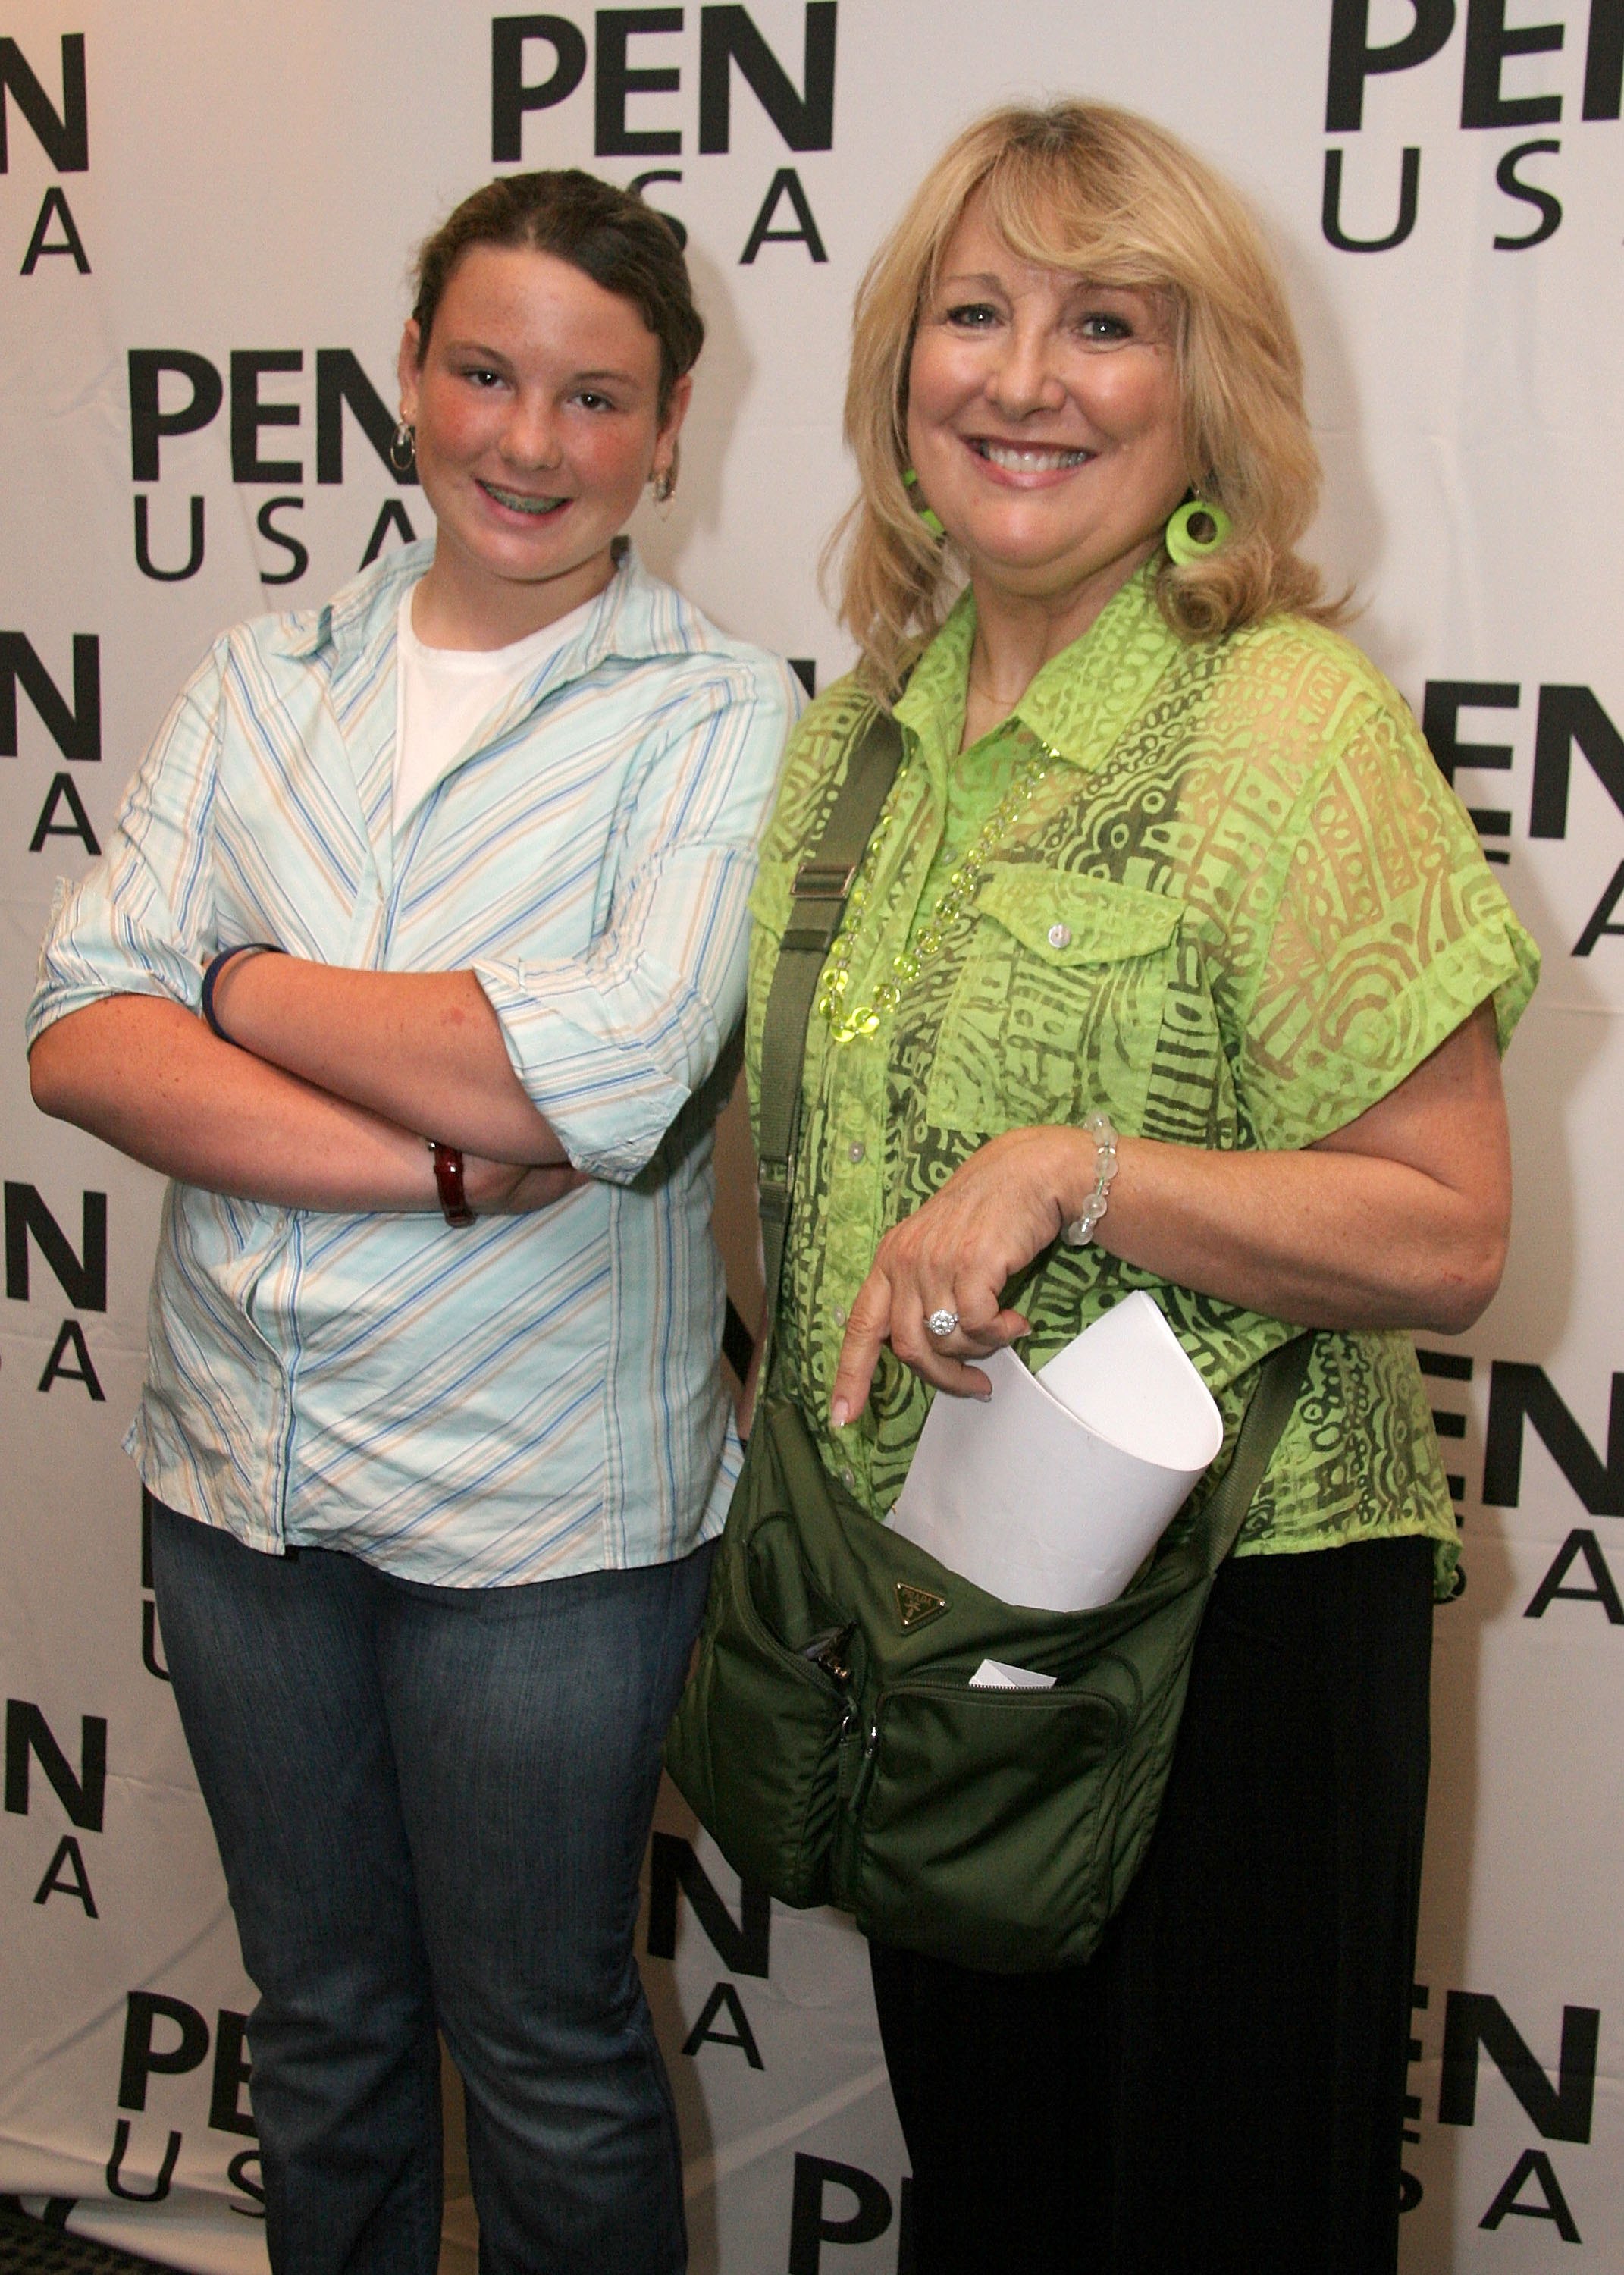 Molly O'Neil and Teri Garr attend the PEN USA's Forbidden Fruit: Readings From Banned Works of Literature at the Skirball Cultural Centre in Los Angeles, California, on June 4, 2006. | Source: Getty Images